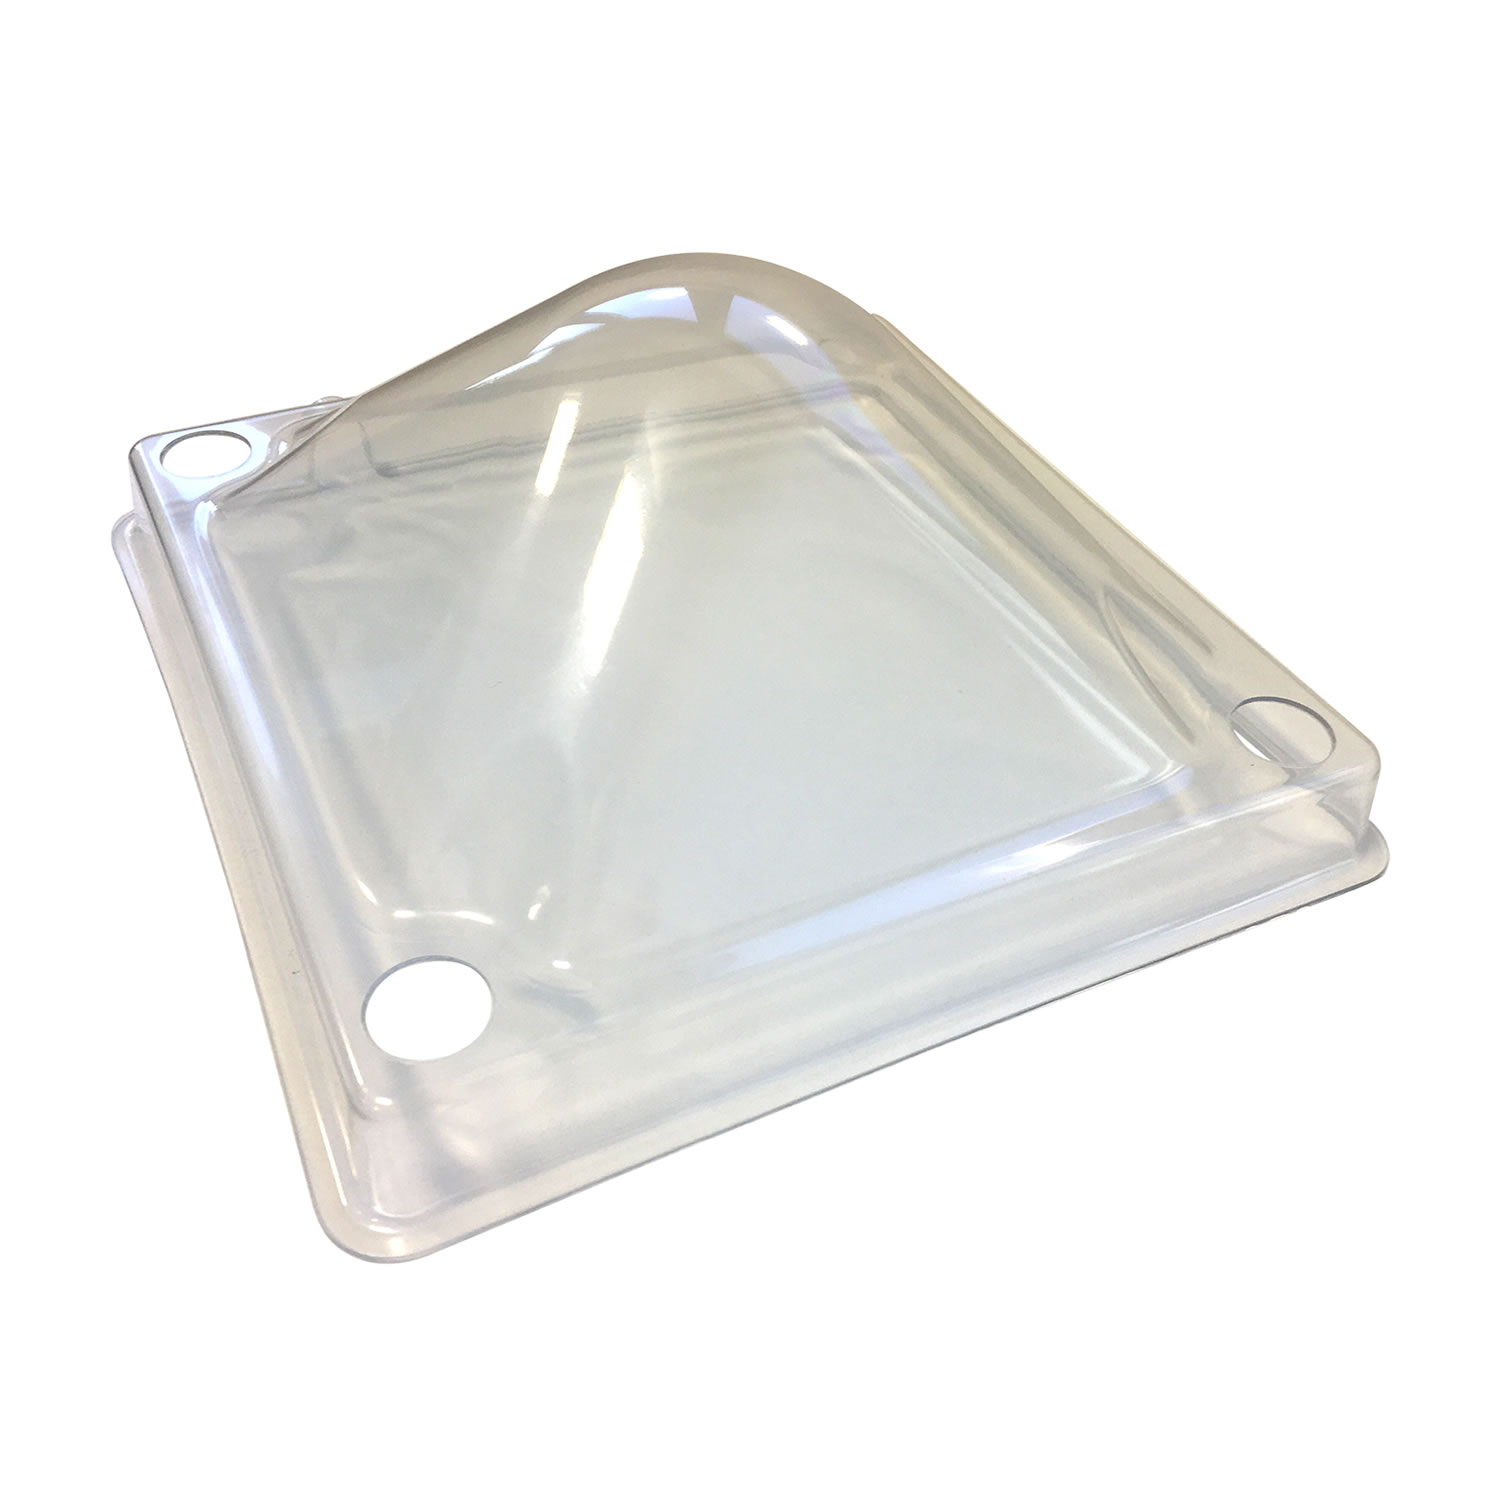 CHICKTEC COMFORT CLEAR PLASTIC DOME COVER 25 CM  CLEAR